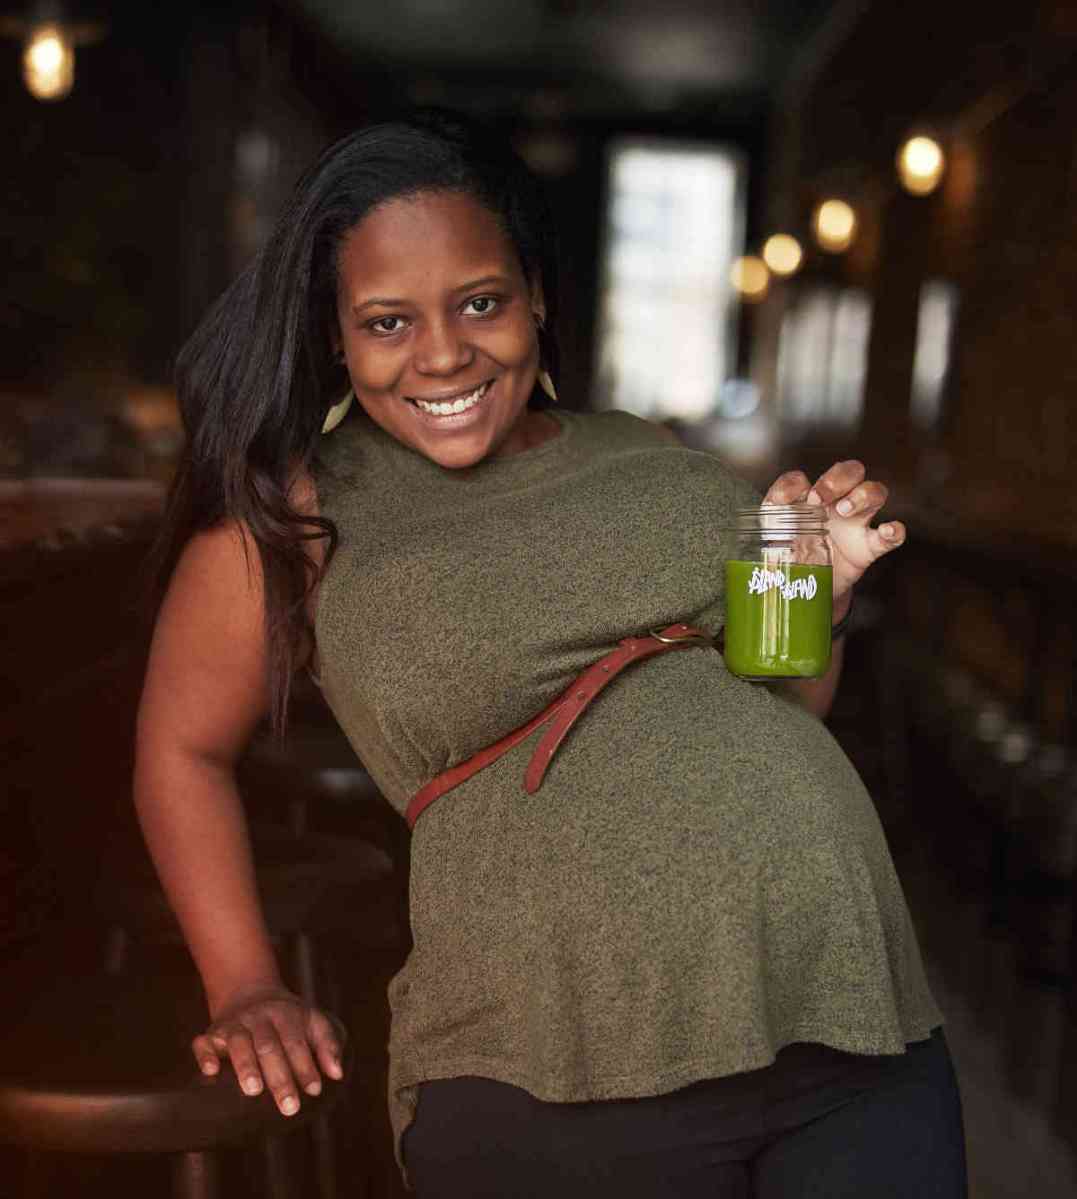 Mommy juice: Brewery throws party for pregnant moms